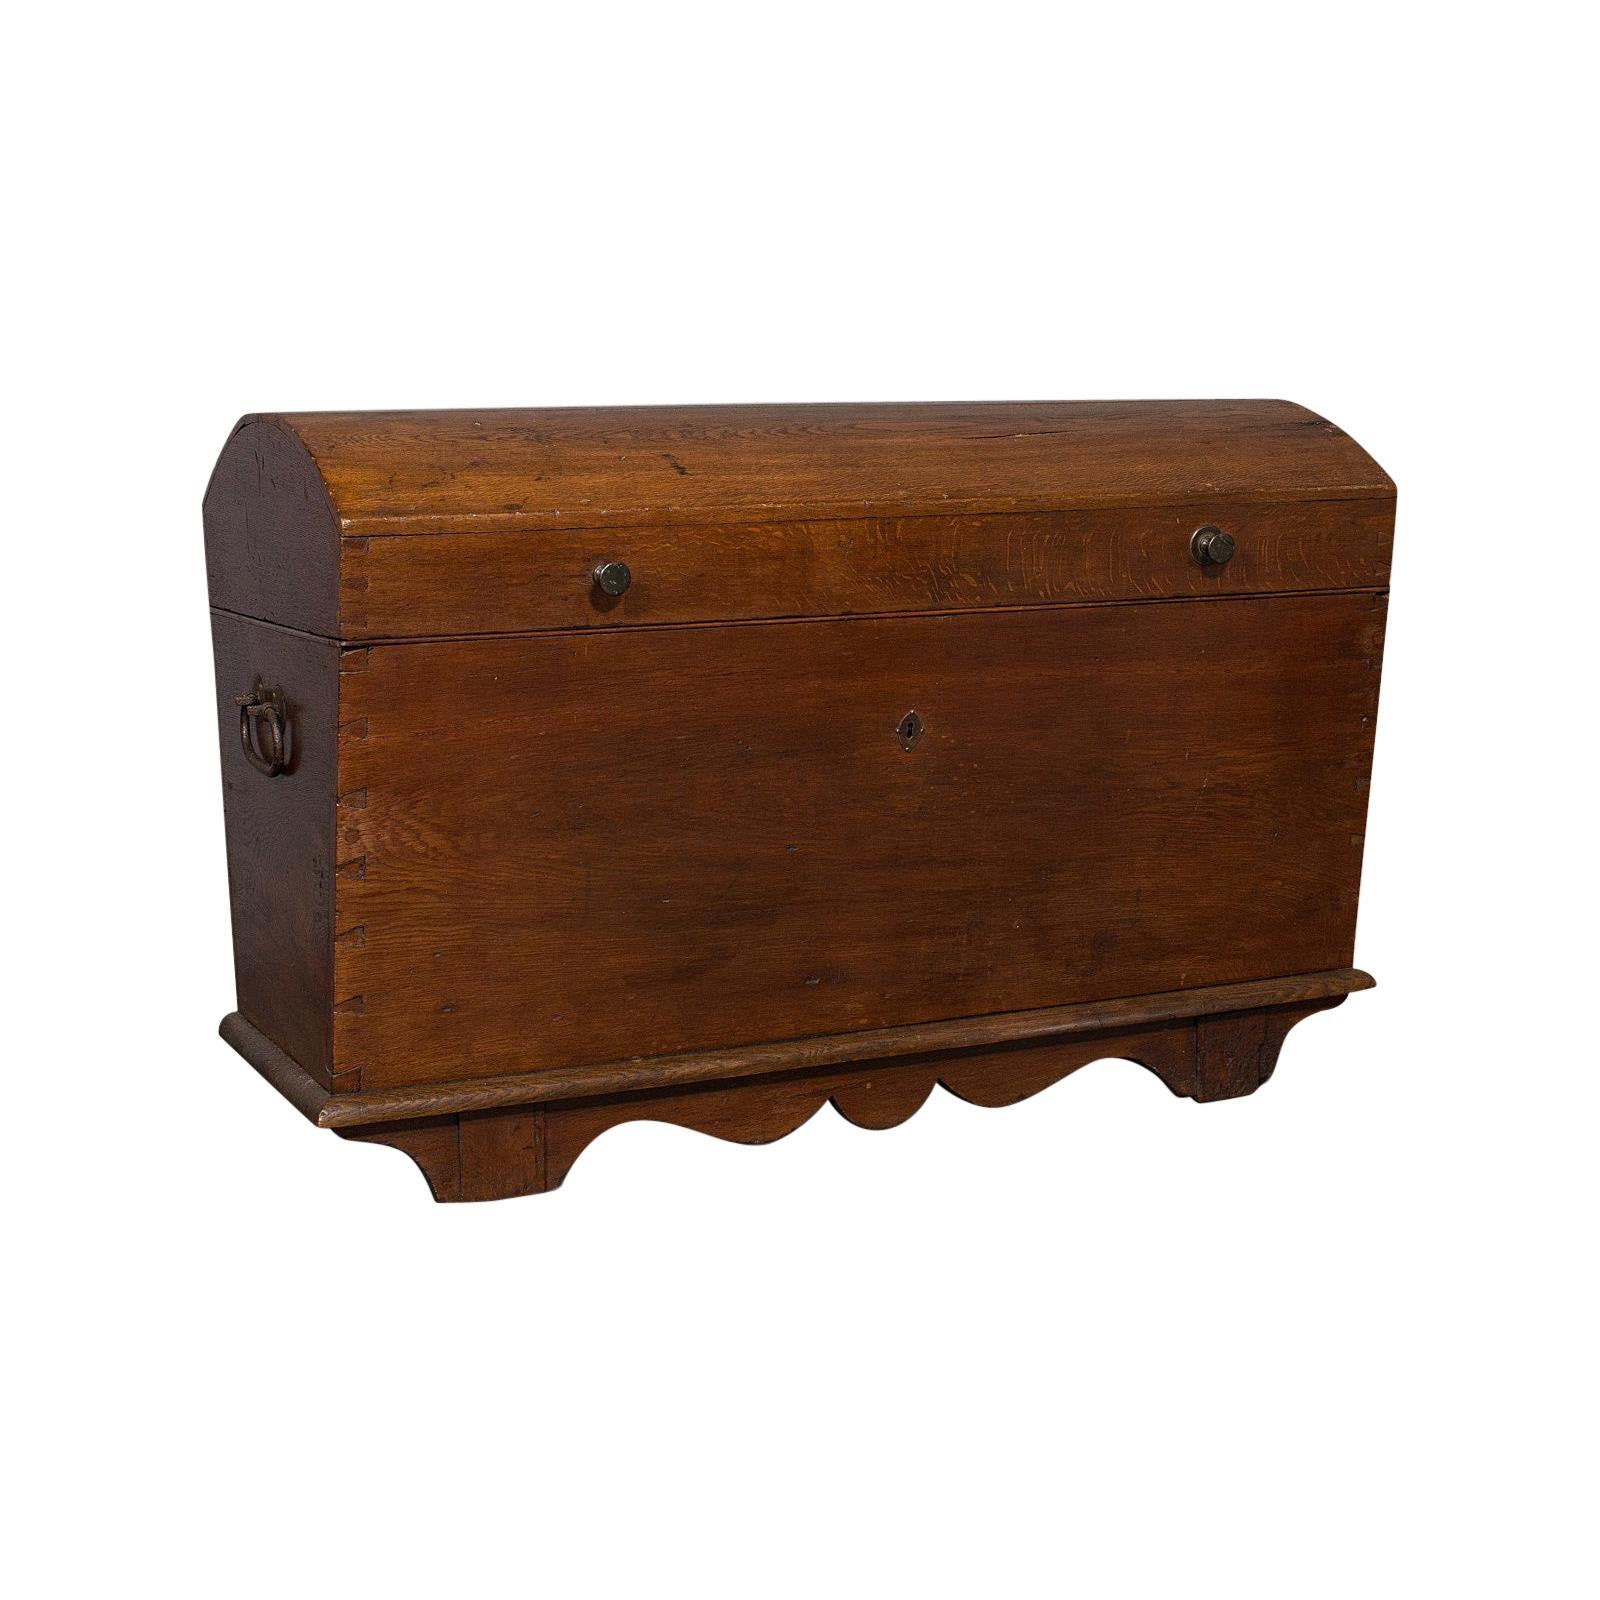 Large Antique Shipping Chest, English, Oak, Carriage Trunk, Georgian, circa 1800 For Sale